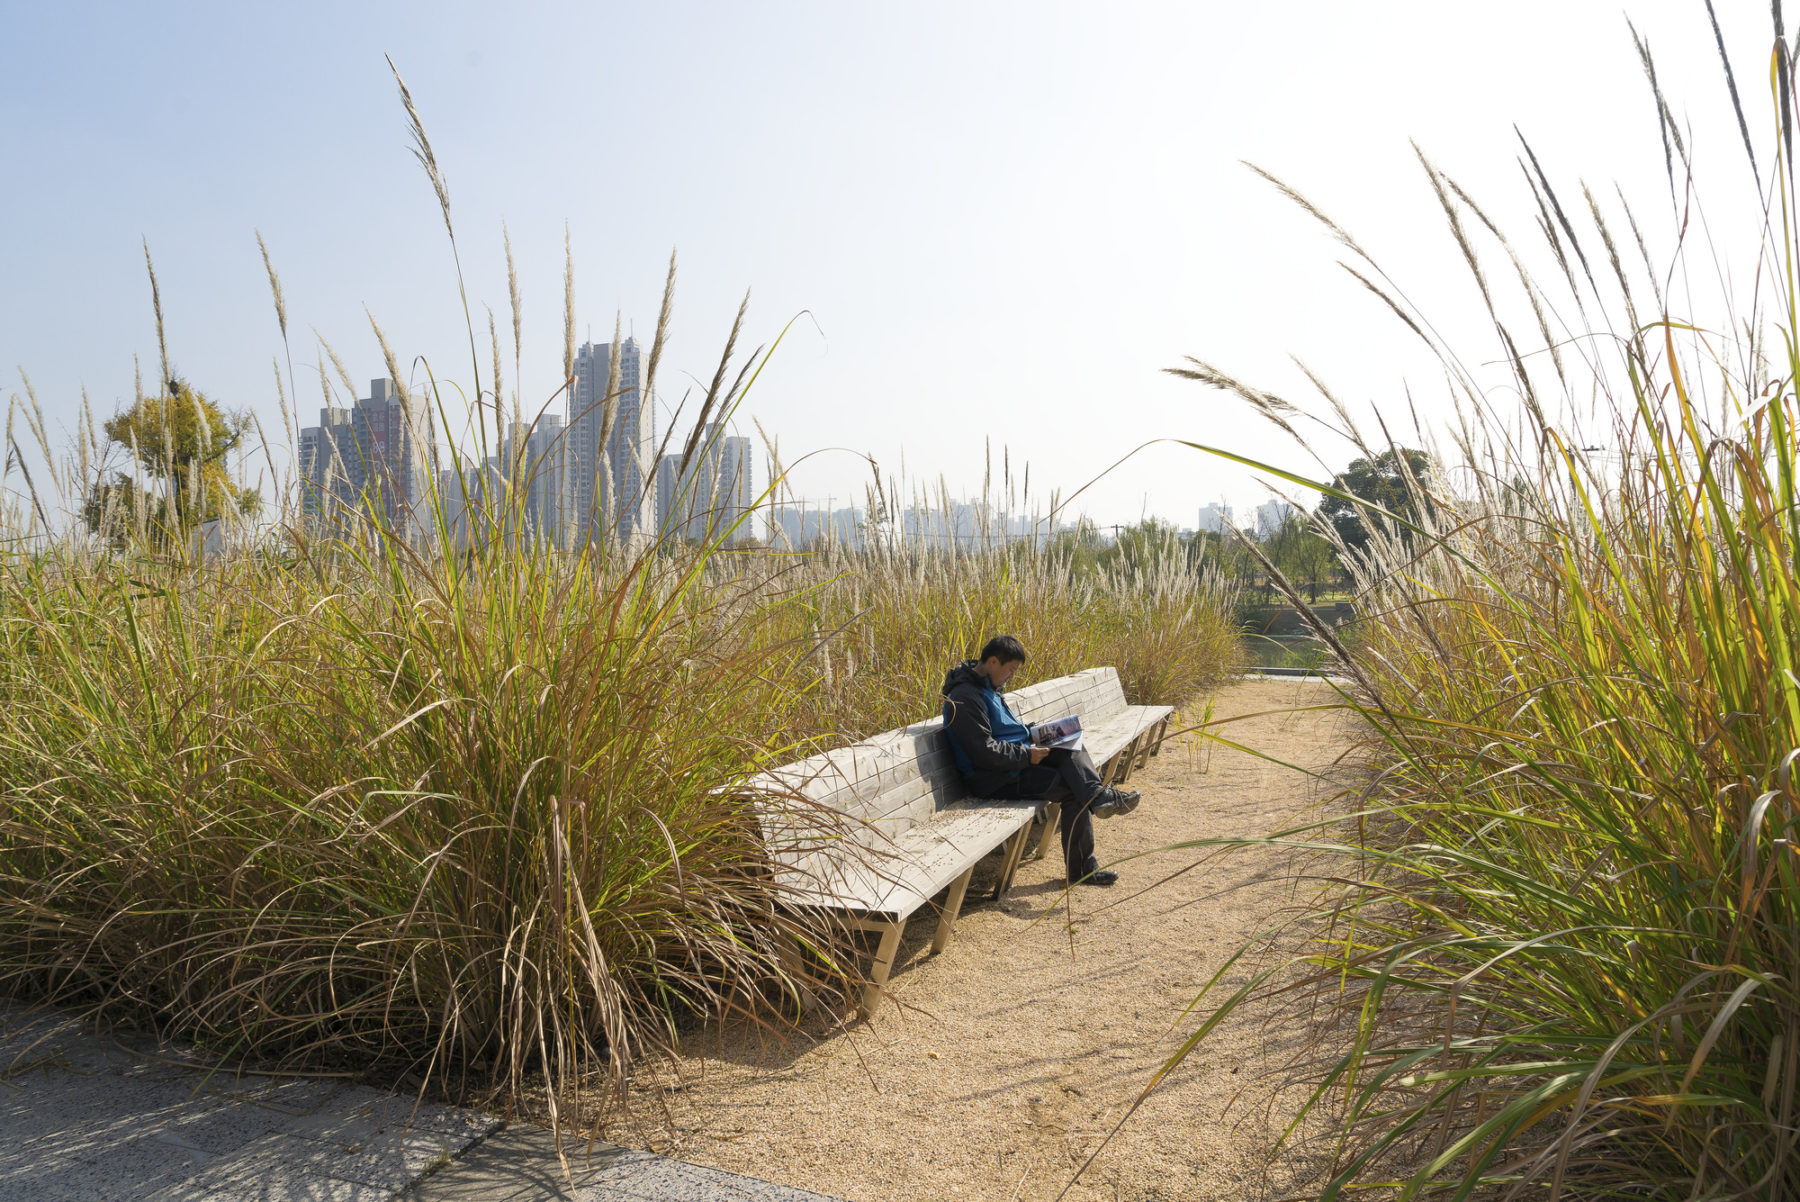 Man sitting on a bench amid tall grass on a sunny day.